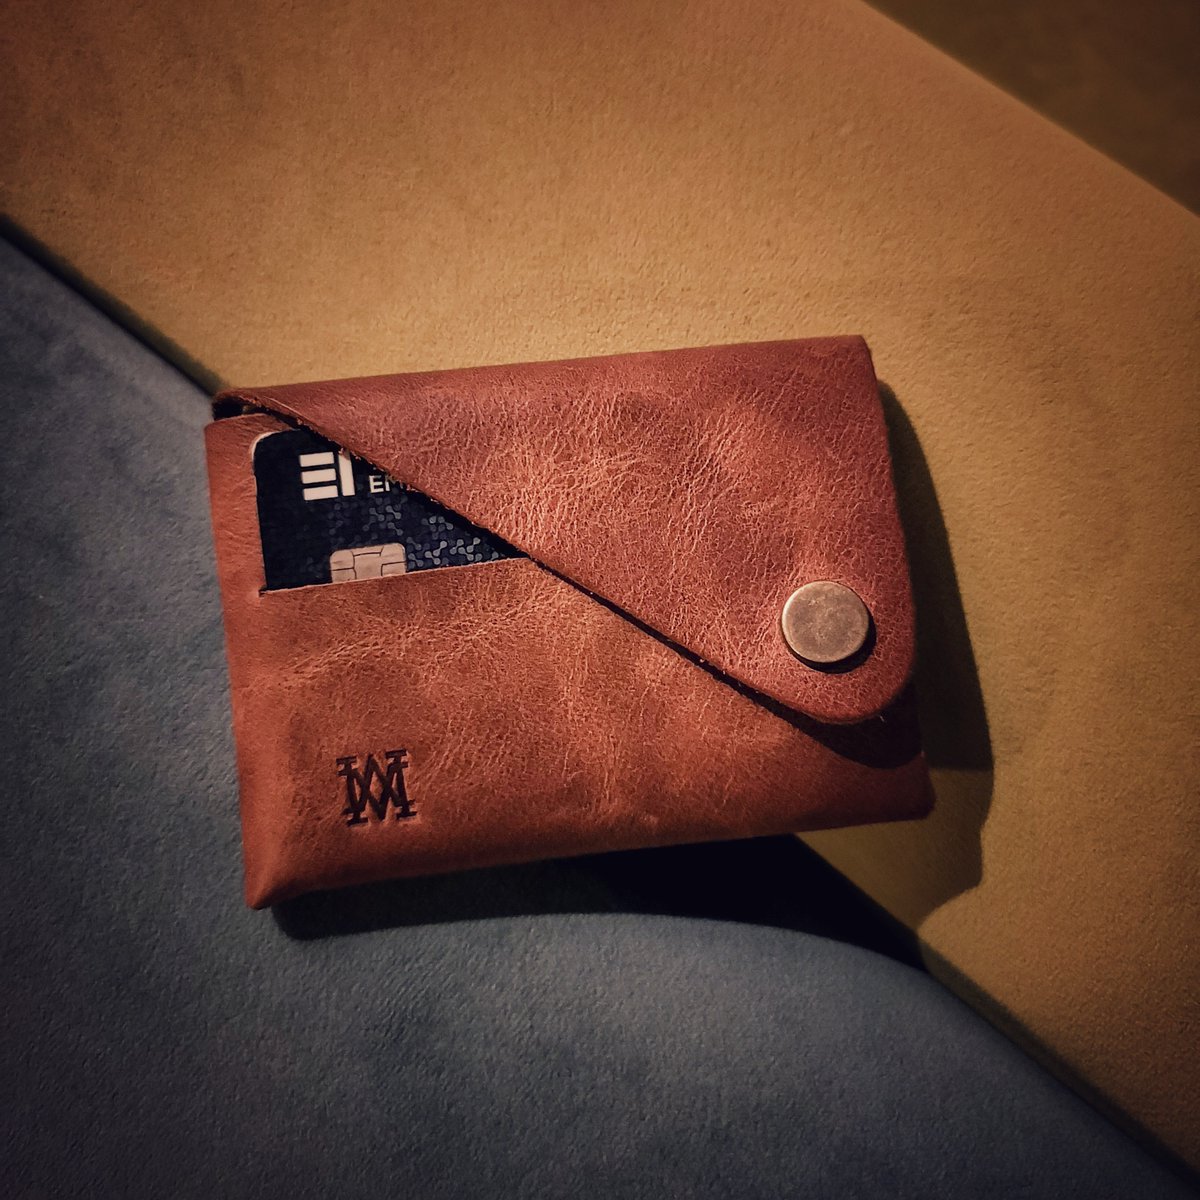 “As we're bombarded daily with new ads for pills, diets and ab-doers, we have to protect our wallets and our time.”

-- Dan John

#brownwallet #leatherwallet #menswallet #wallet